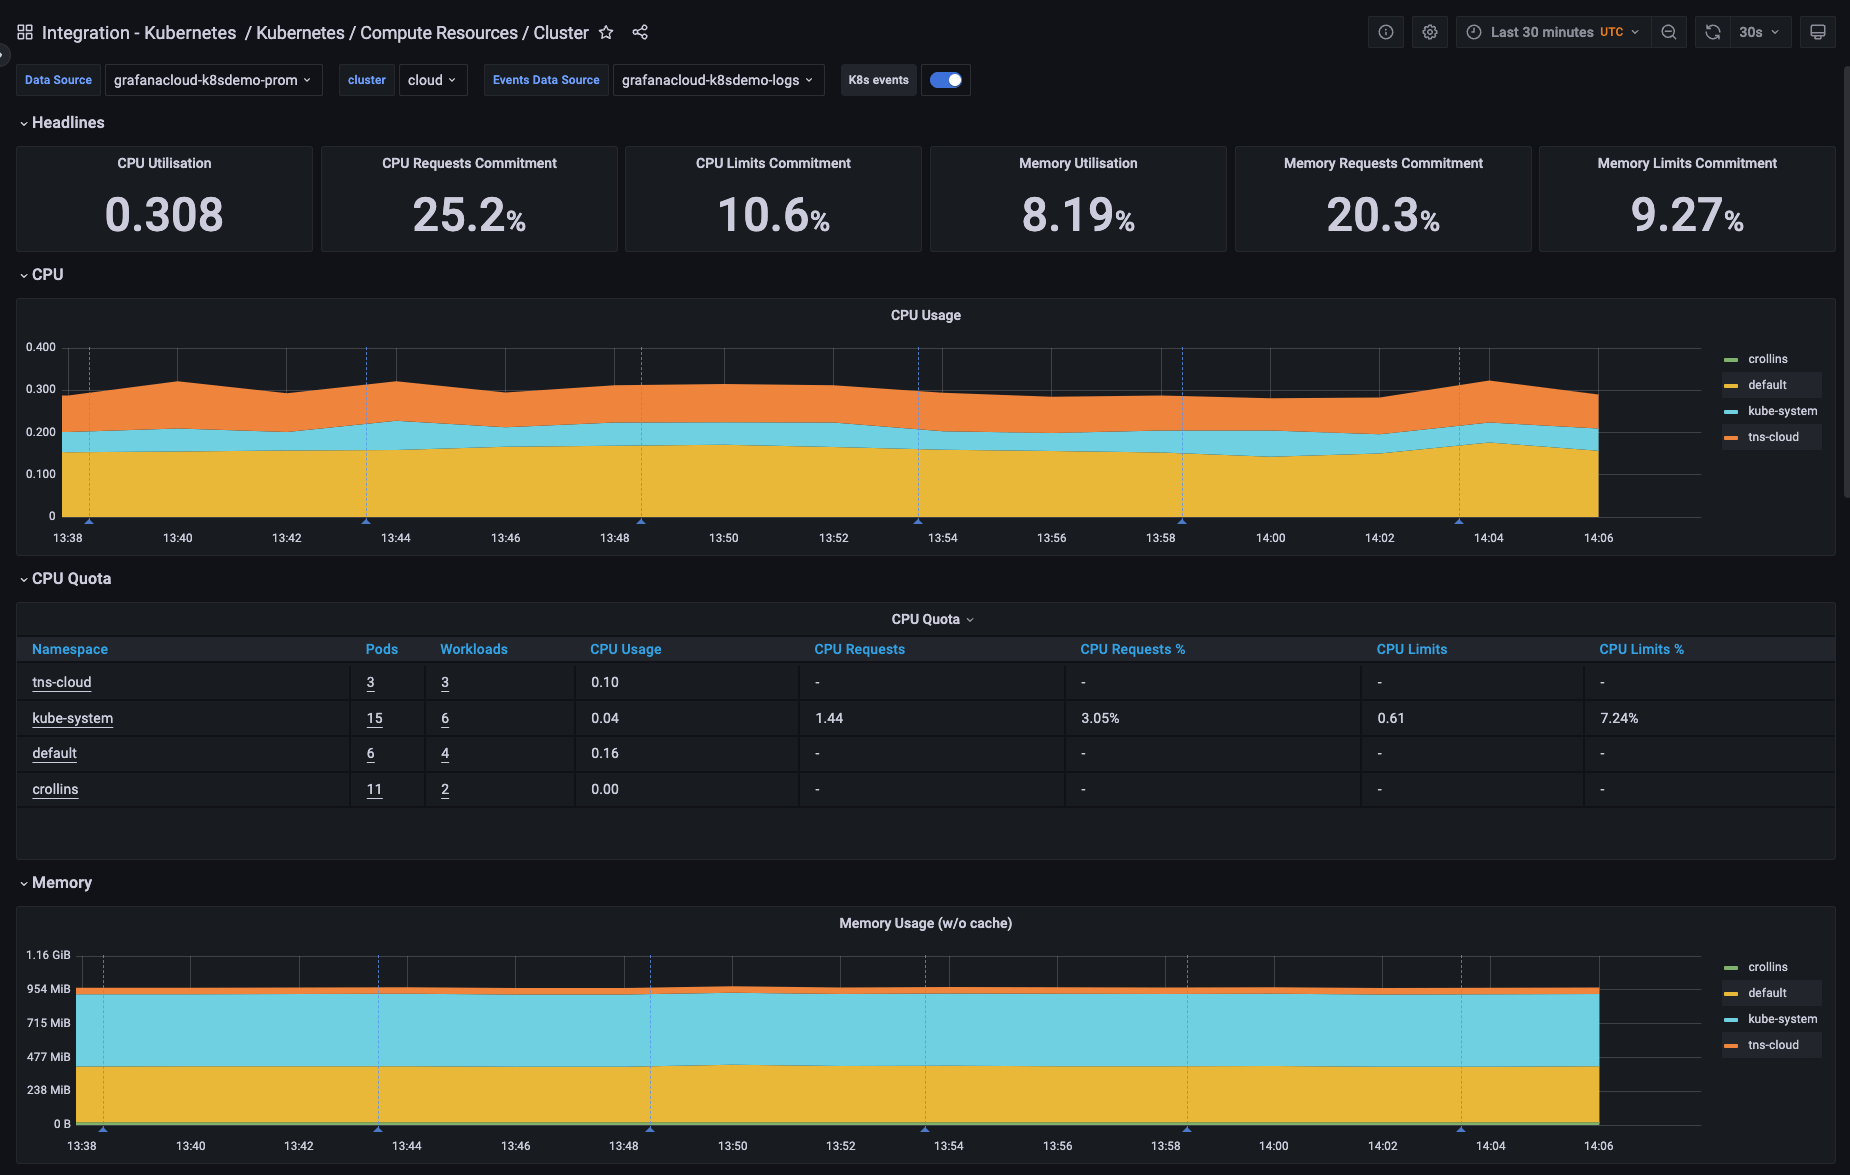 *Prebuilt Grafana dashboards are available in Kubernetes Monitoring in Grafana Cloud.*